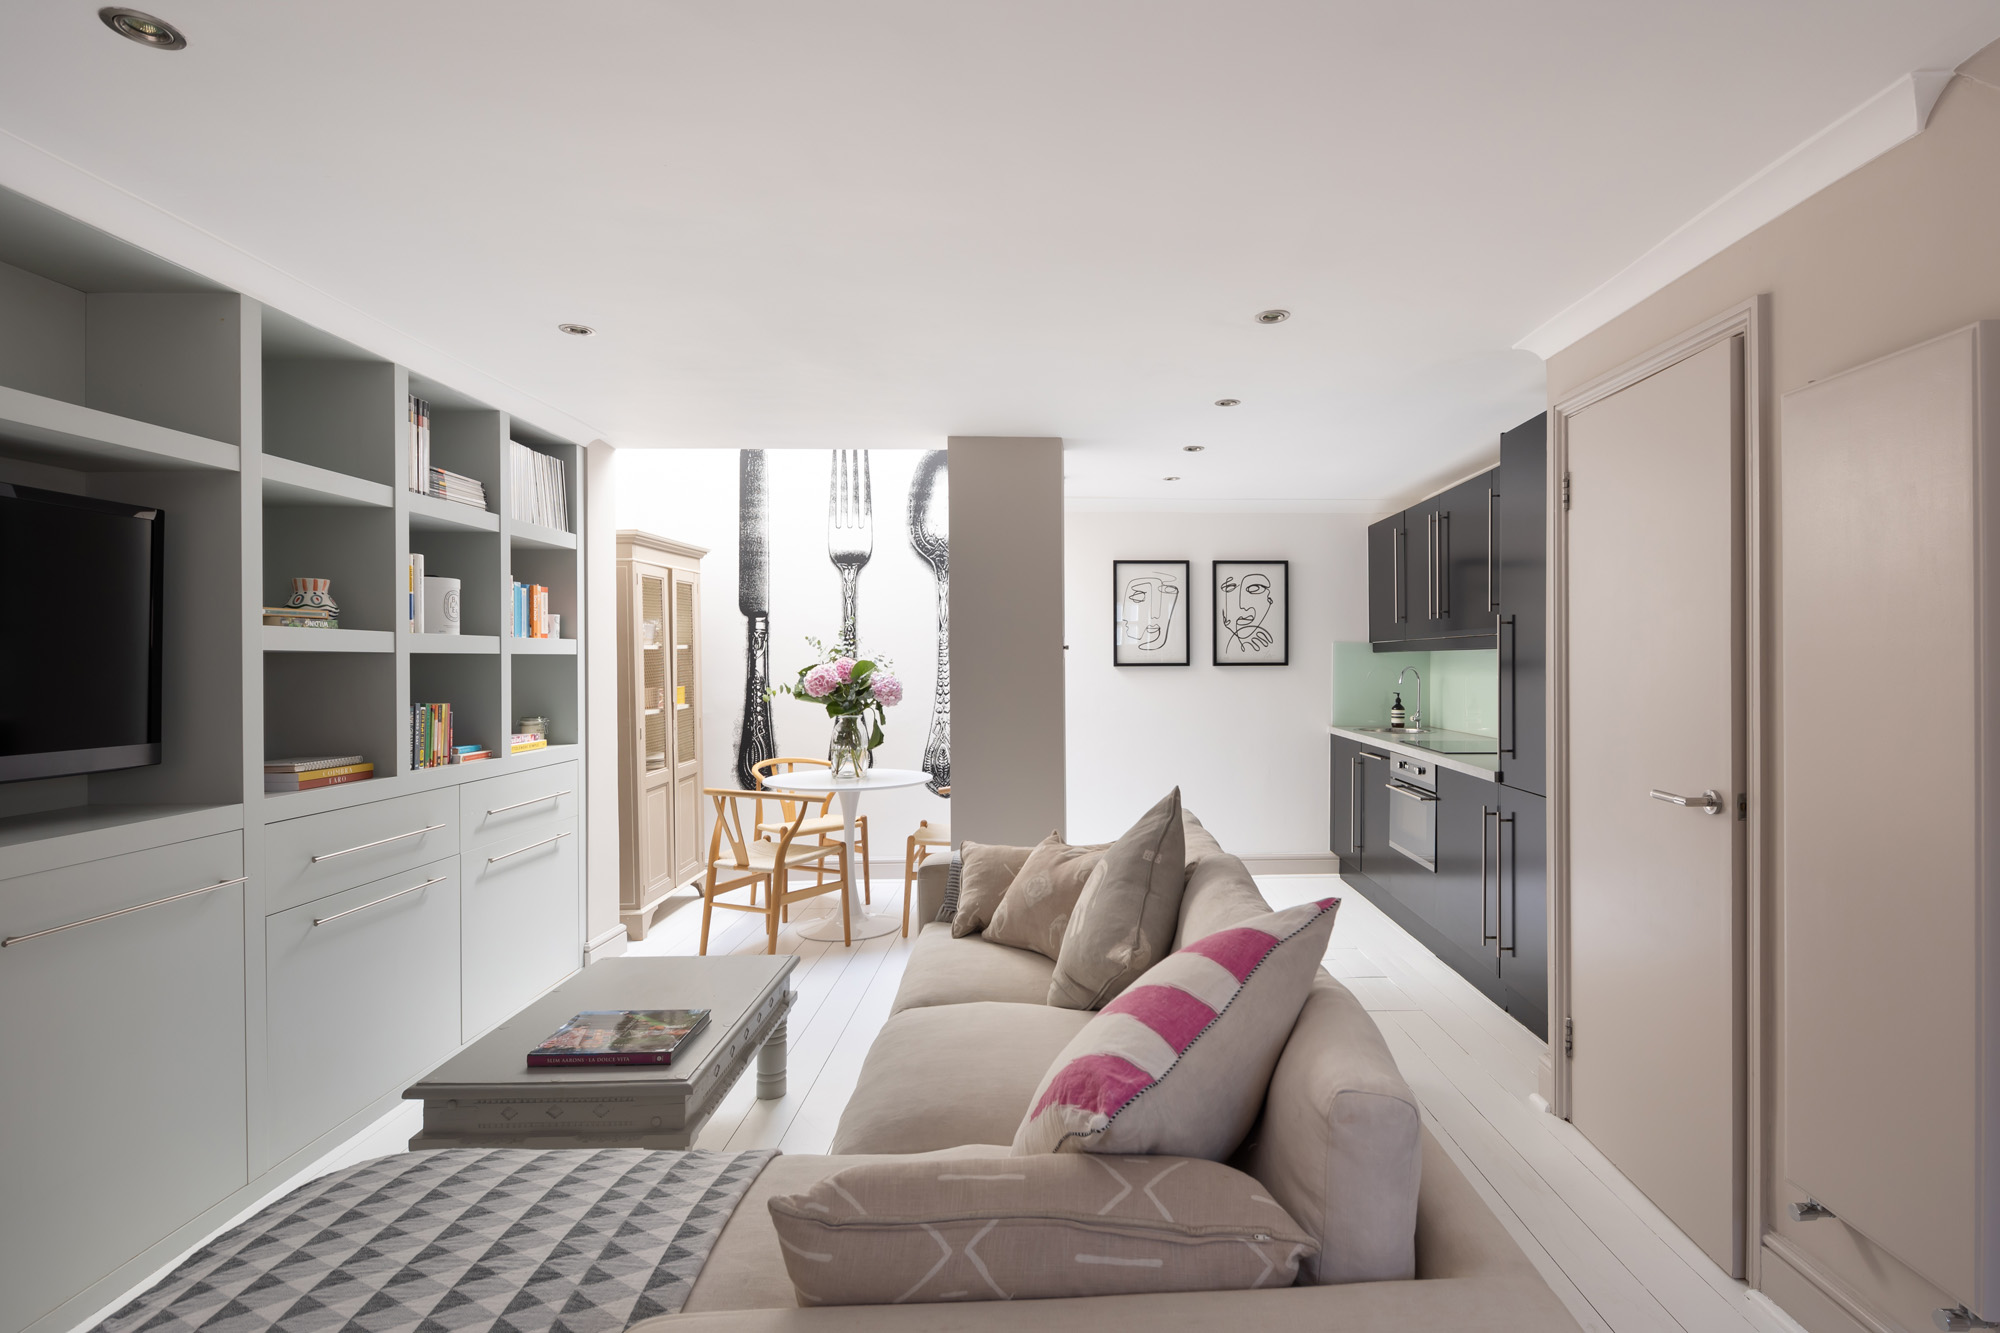 For sale, Pottery Lane London Holland Park W11 living room with shelving and sofas